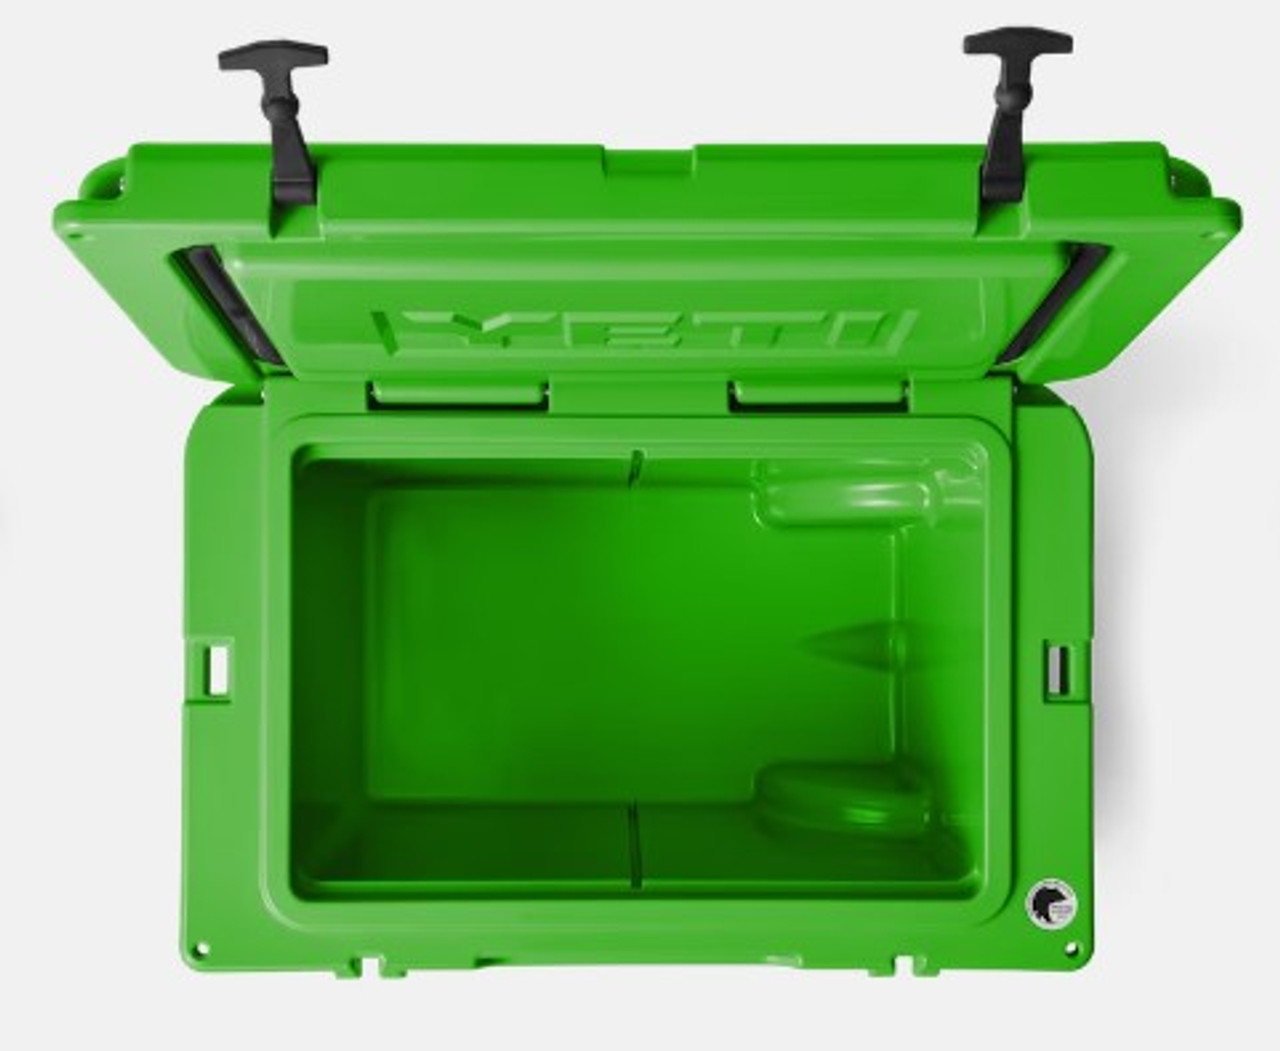 https://cdn11.bigcommerce.com/s-s7ib93jl4n/images/stencil/1280x1280/products/55451/82931/tundra-Haul-Wheeled-Cooler-Canopy-Green-F__20192.1678475921.jpg?c=2?imbypass=on